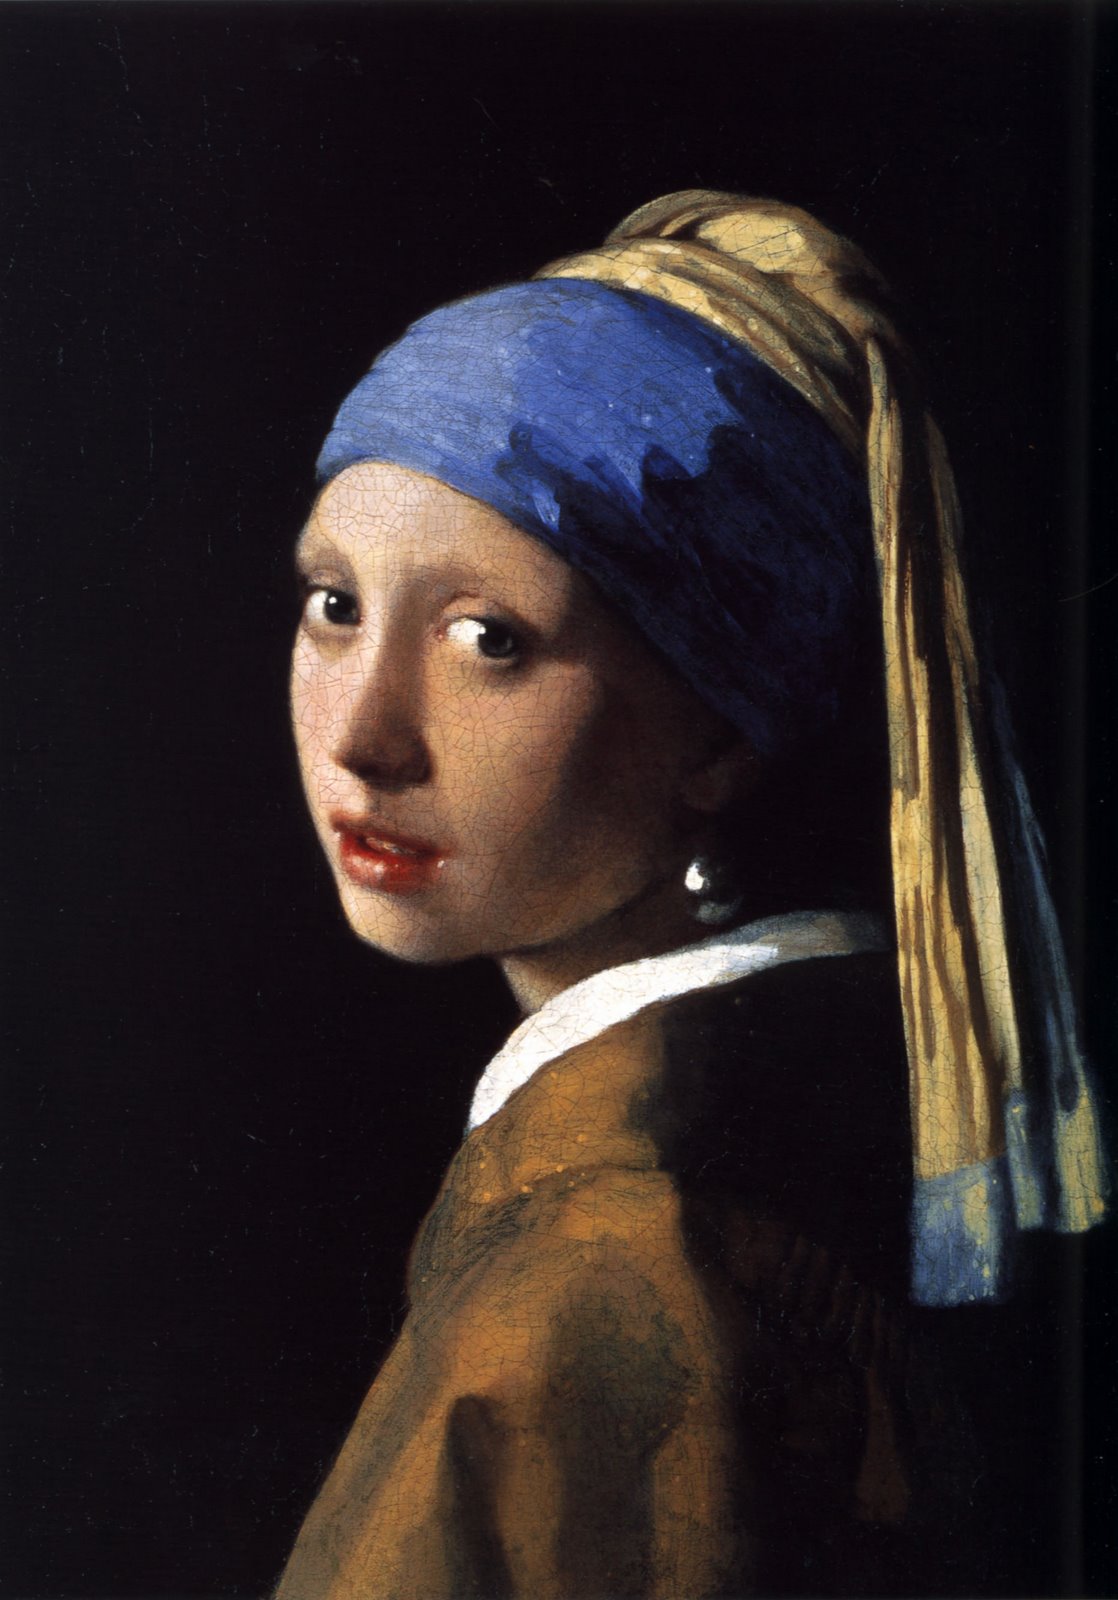 [The_Girl_With_The_Pearl_Earring_(1665).jpg]